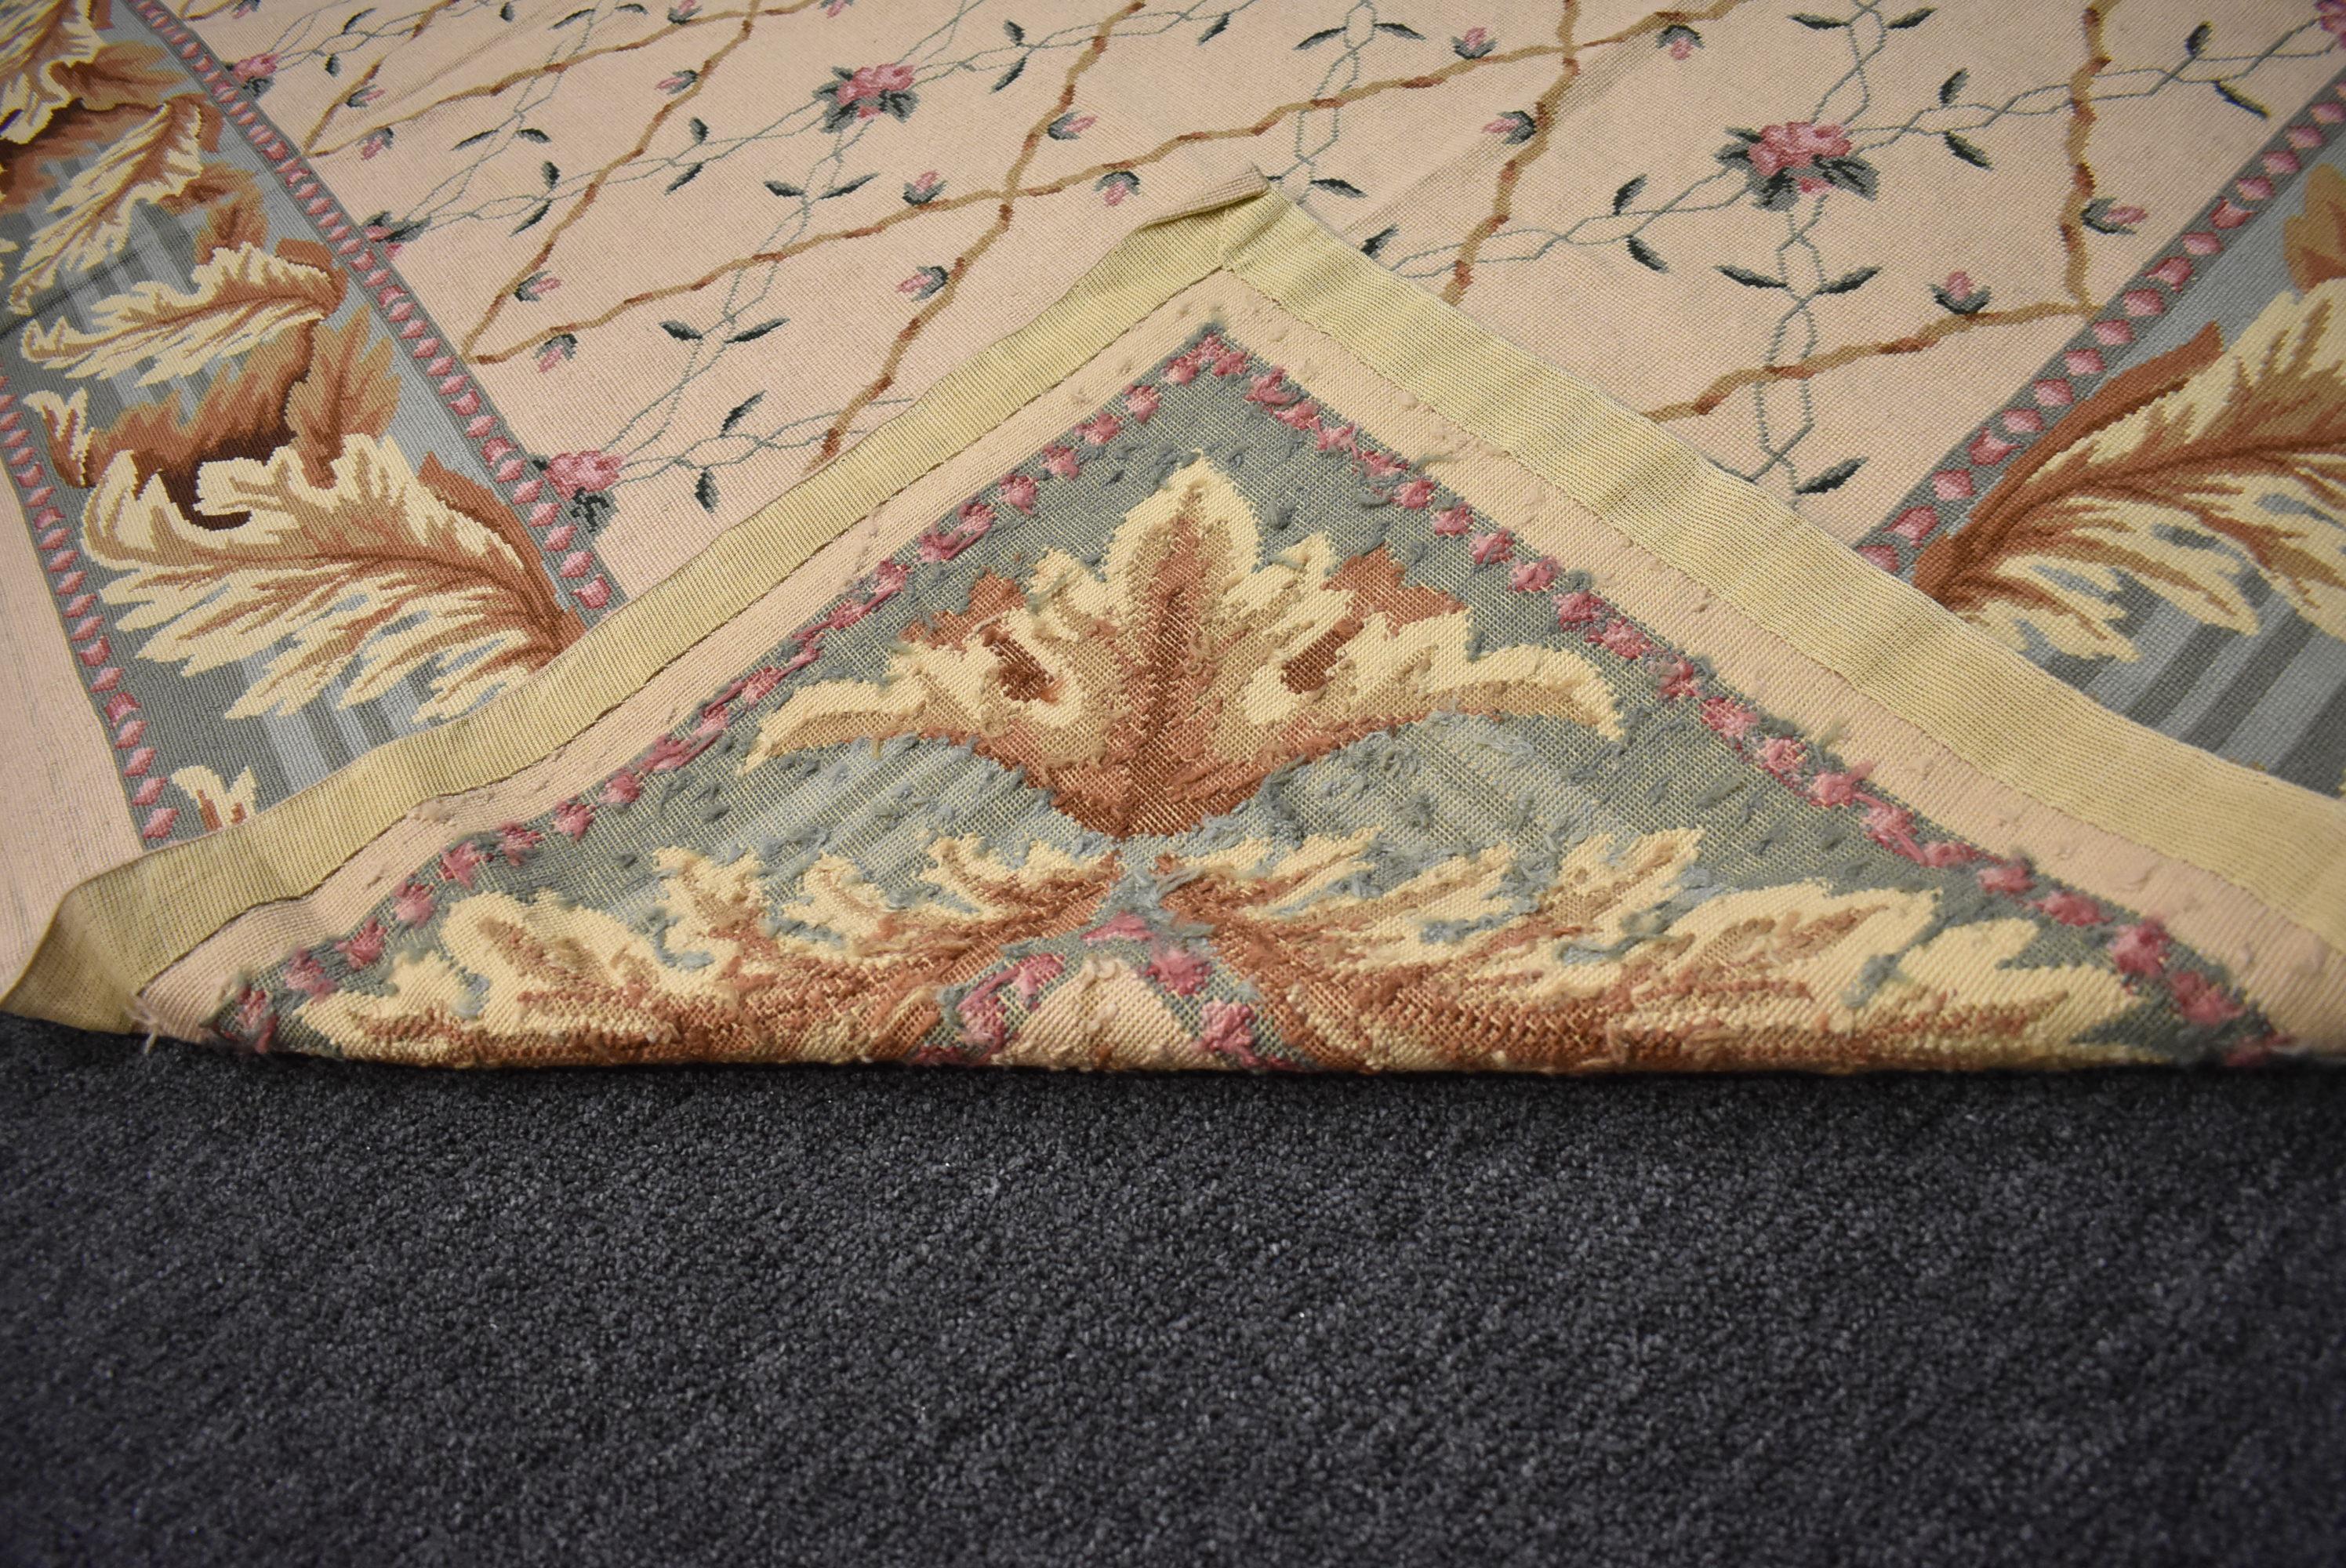 Floral tapestry rug with roses and lattace designs in Aubusson - Beauvais style. Very nice condition. Dimensions: 106